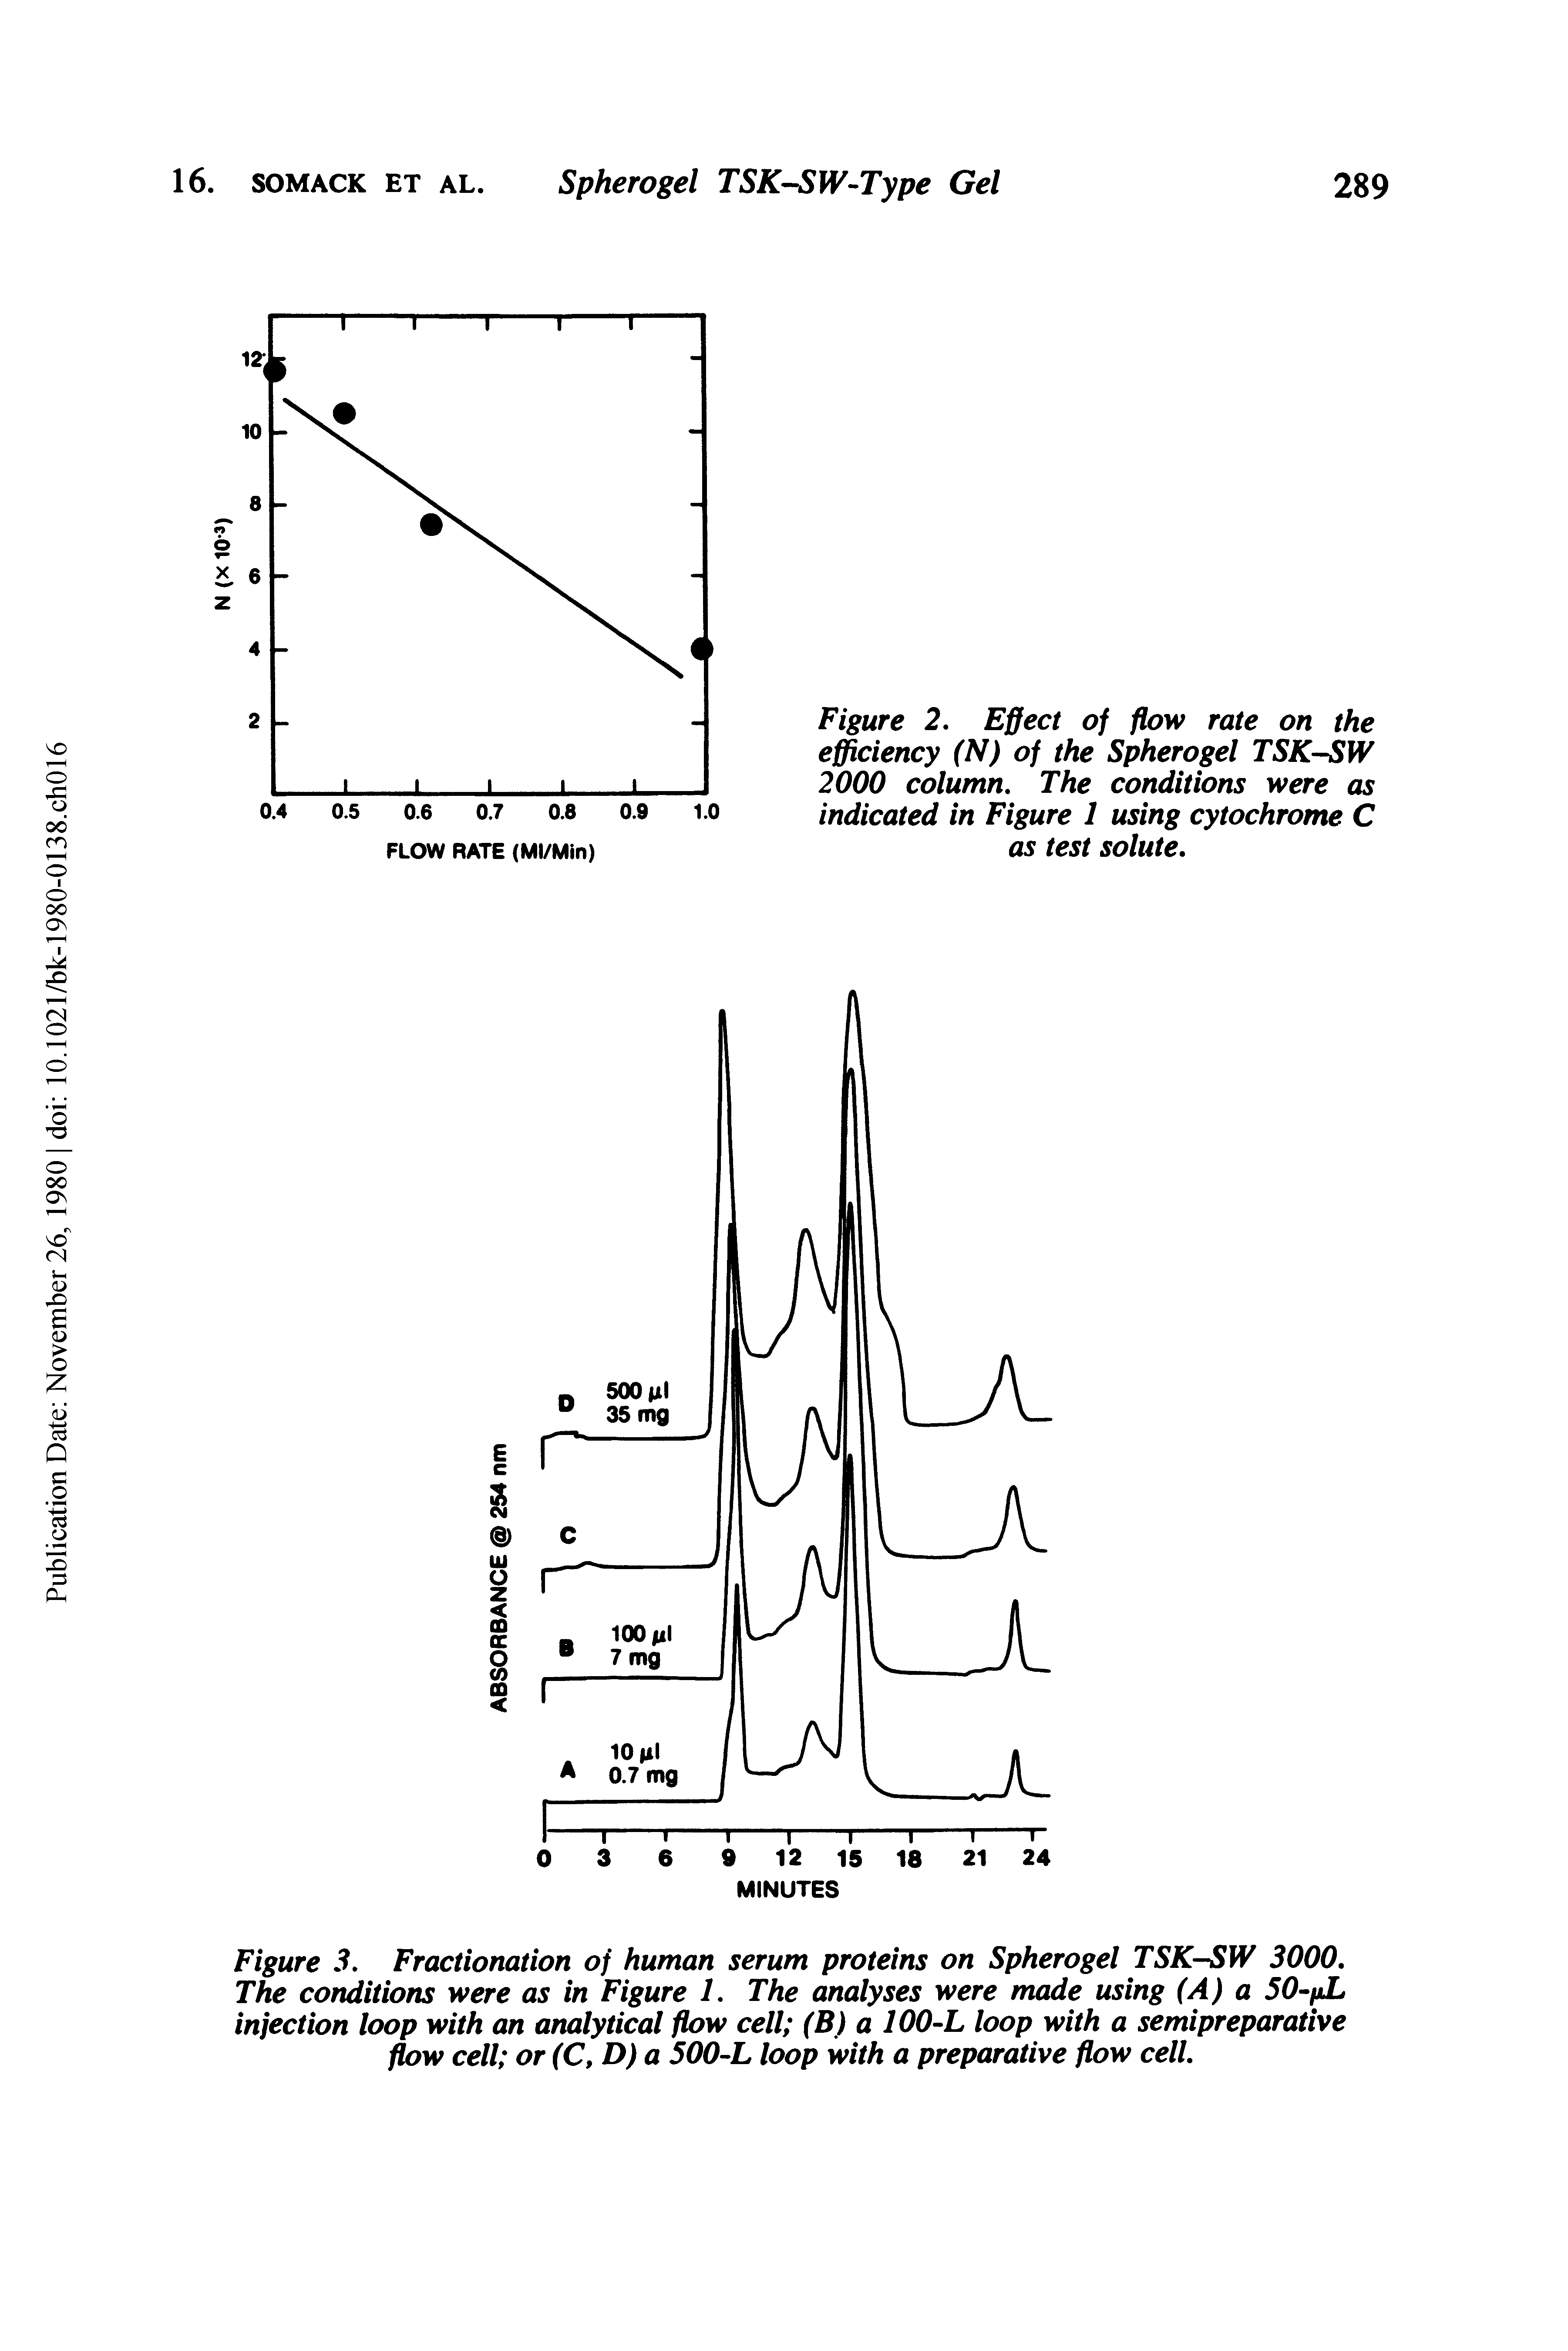 Figure 3. Fractionation of human serum proteins on Spherogel TSKSW 3000, The conditions were as in Figure 1. The analyses were made using (A) a 50-fiL injection loop with an analytical flow cell (B) a 100-L loop with a semipreparative flow cell or (C,D) a 500-L loop with a preparative flow cell.